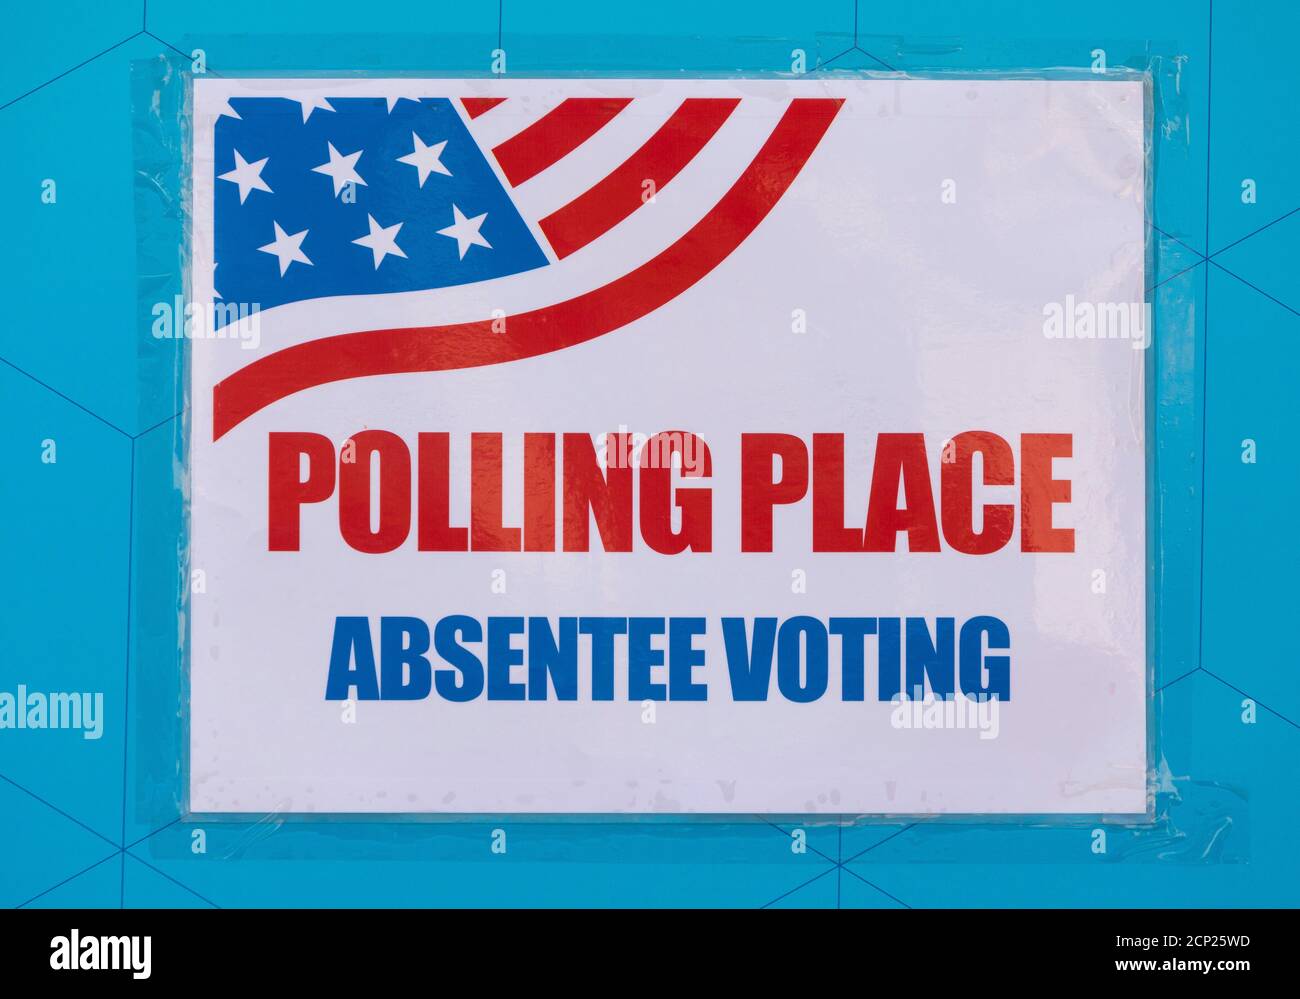 ARLINGTON, VIRGINIA, USA, SEPTEMBER 18, 2020 - Polling Place sign during first day of early voting, 2020 presidential election. Stock Photo